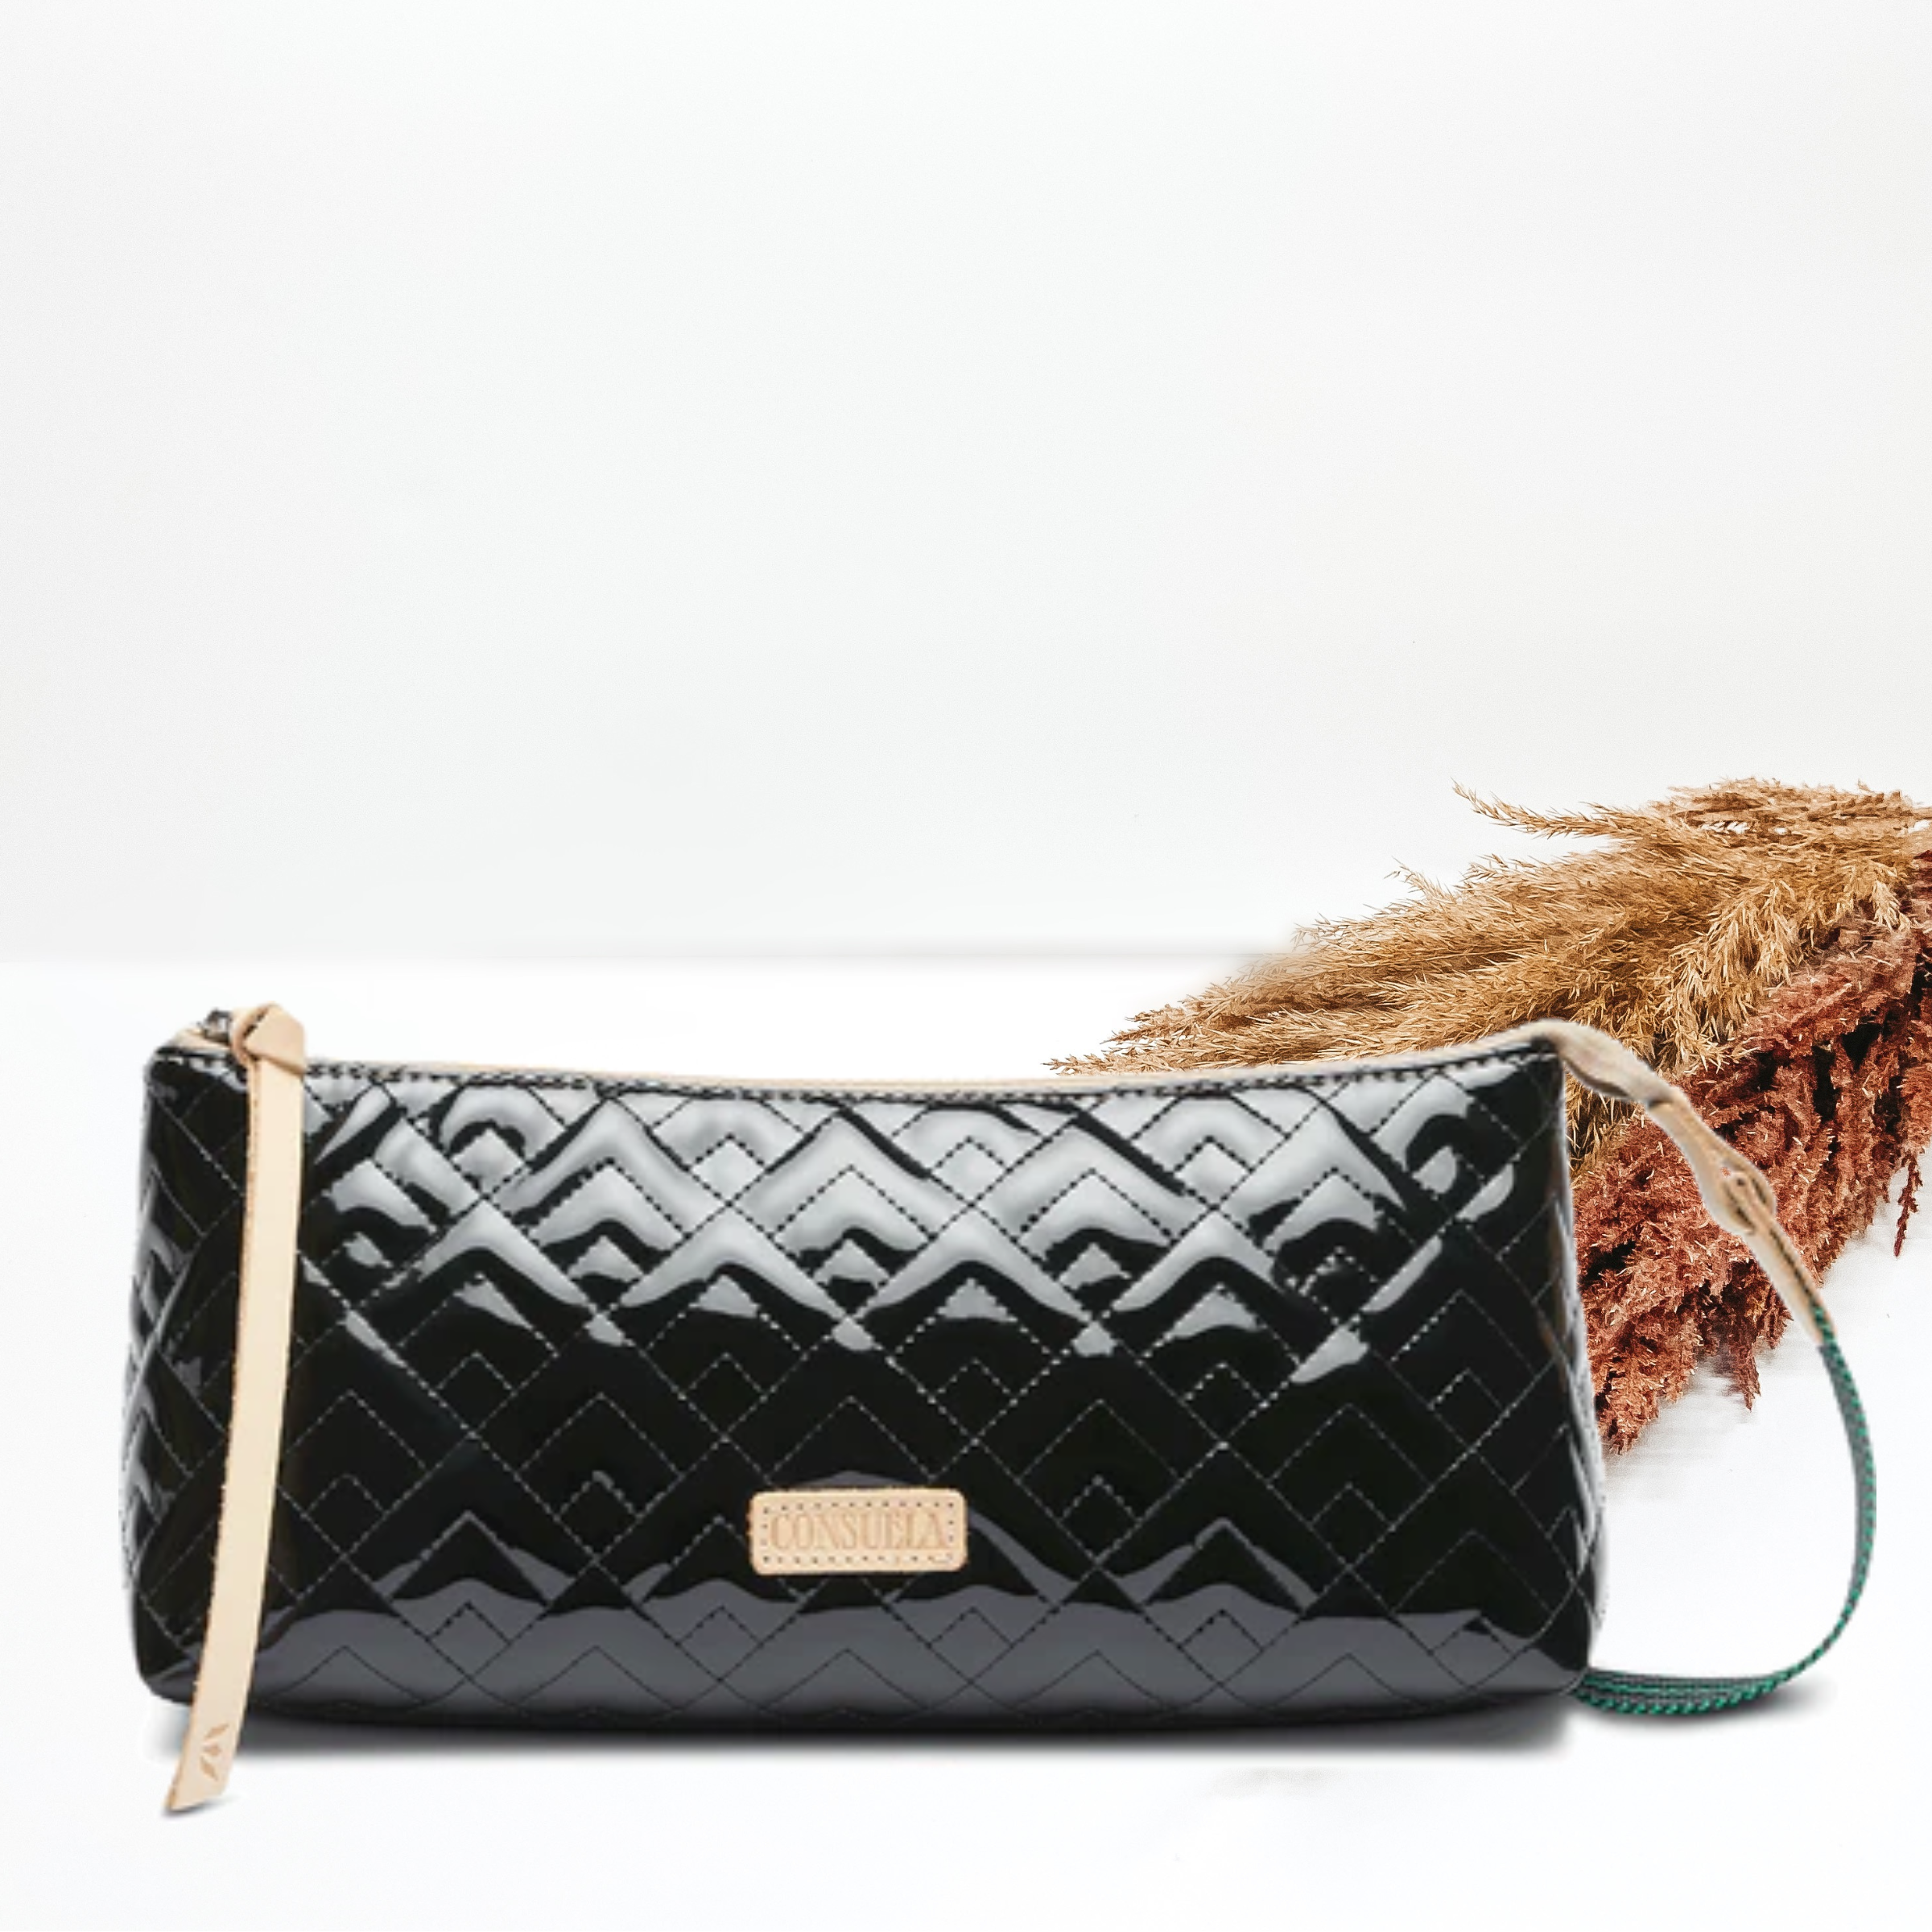 Long black bag with a side strap. This bag has a quilted design. this bag is pictured on a white background with tan and brown pompous grass on the right side. 